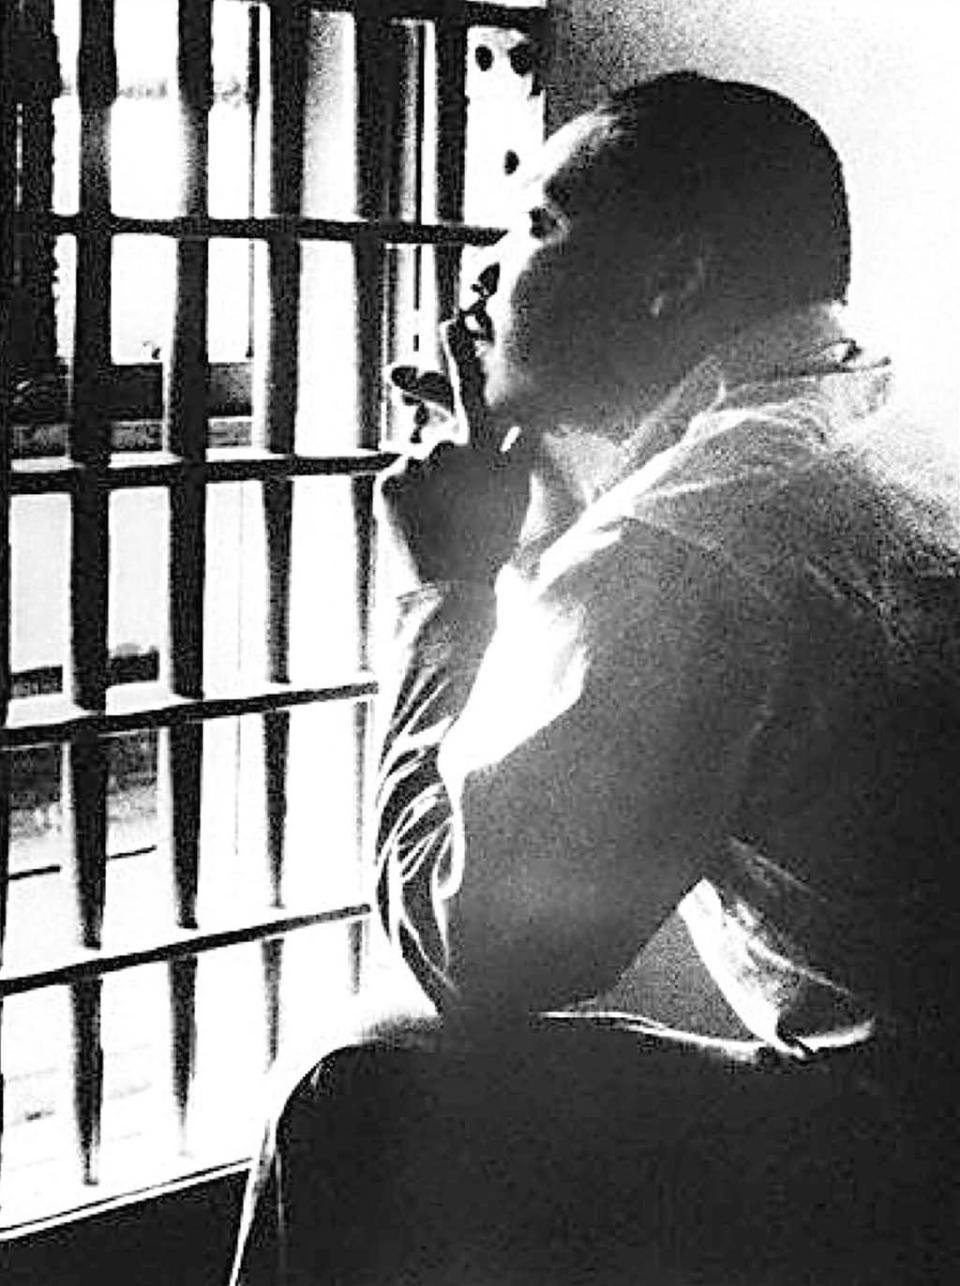 "Letter From Birmingham Jail" was written by the Rev. Martin Luther King Jr. while he was imprisoned there in 1967 as a participant in nonviolent demonstrations against segregation. King wrote the letter in response to a public statement of concern and
caution issued by eight white religious leaders of the South.